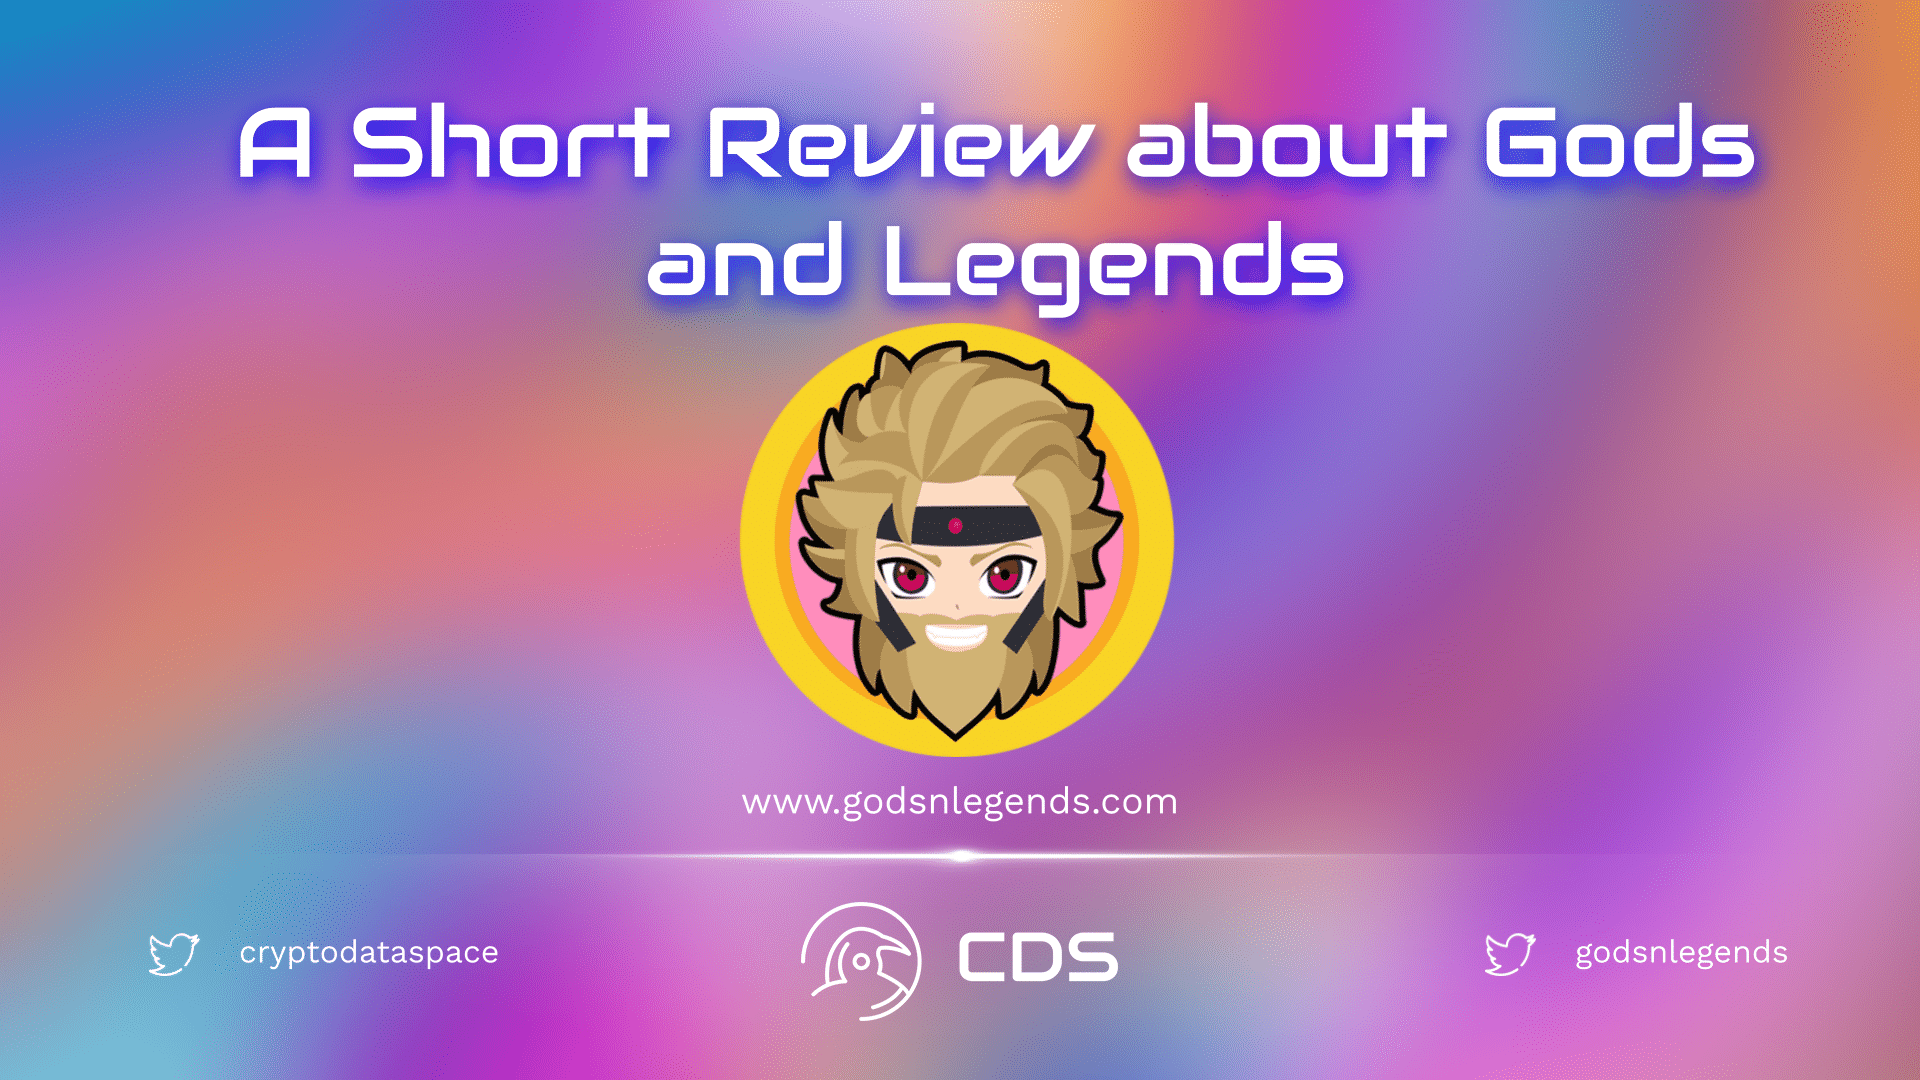 A Short Review about Gods and Legends